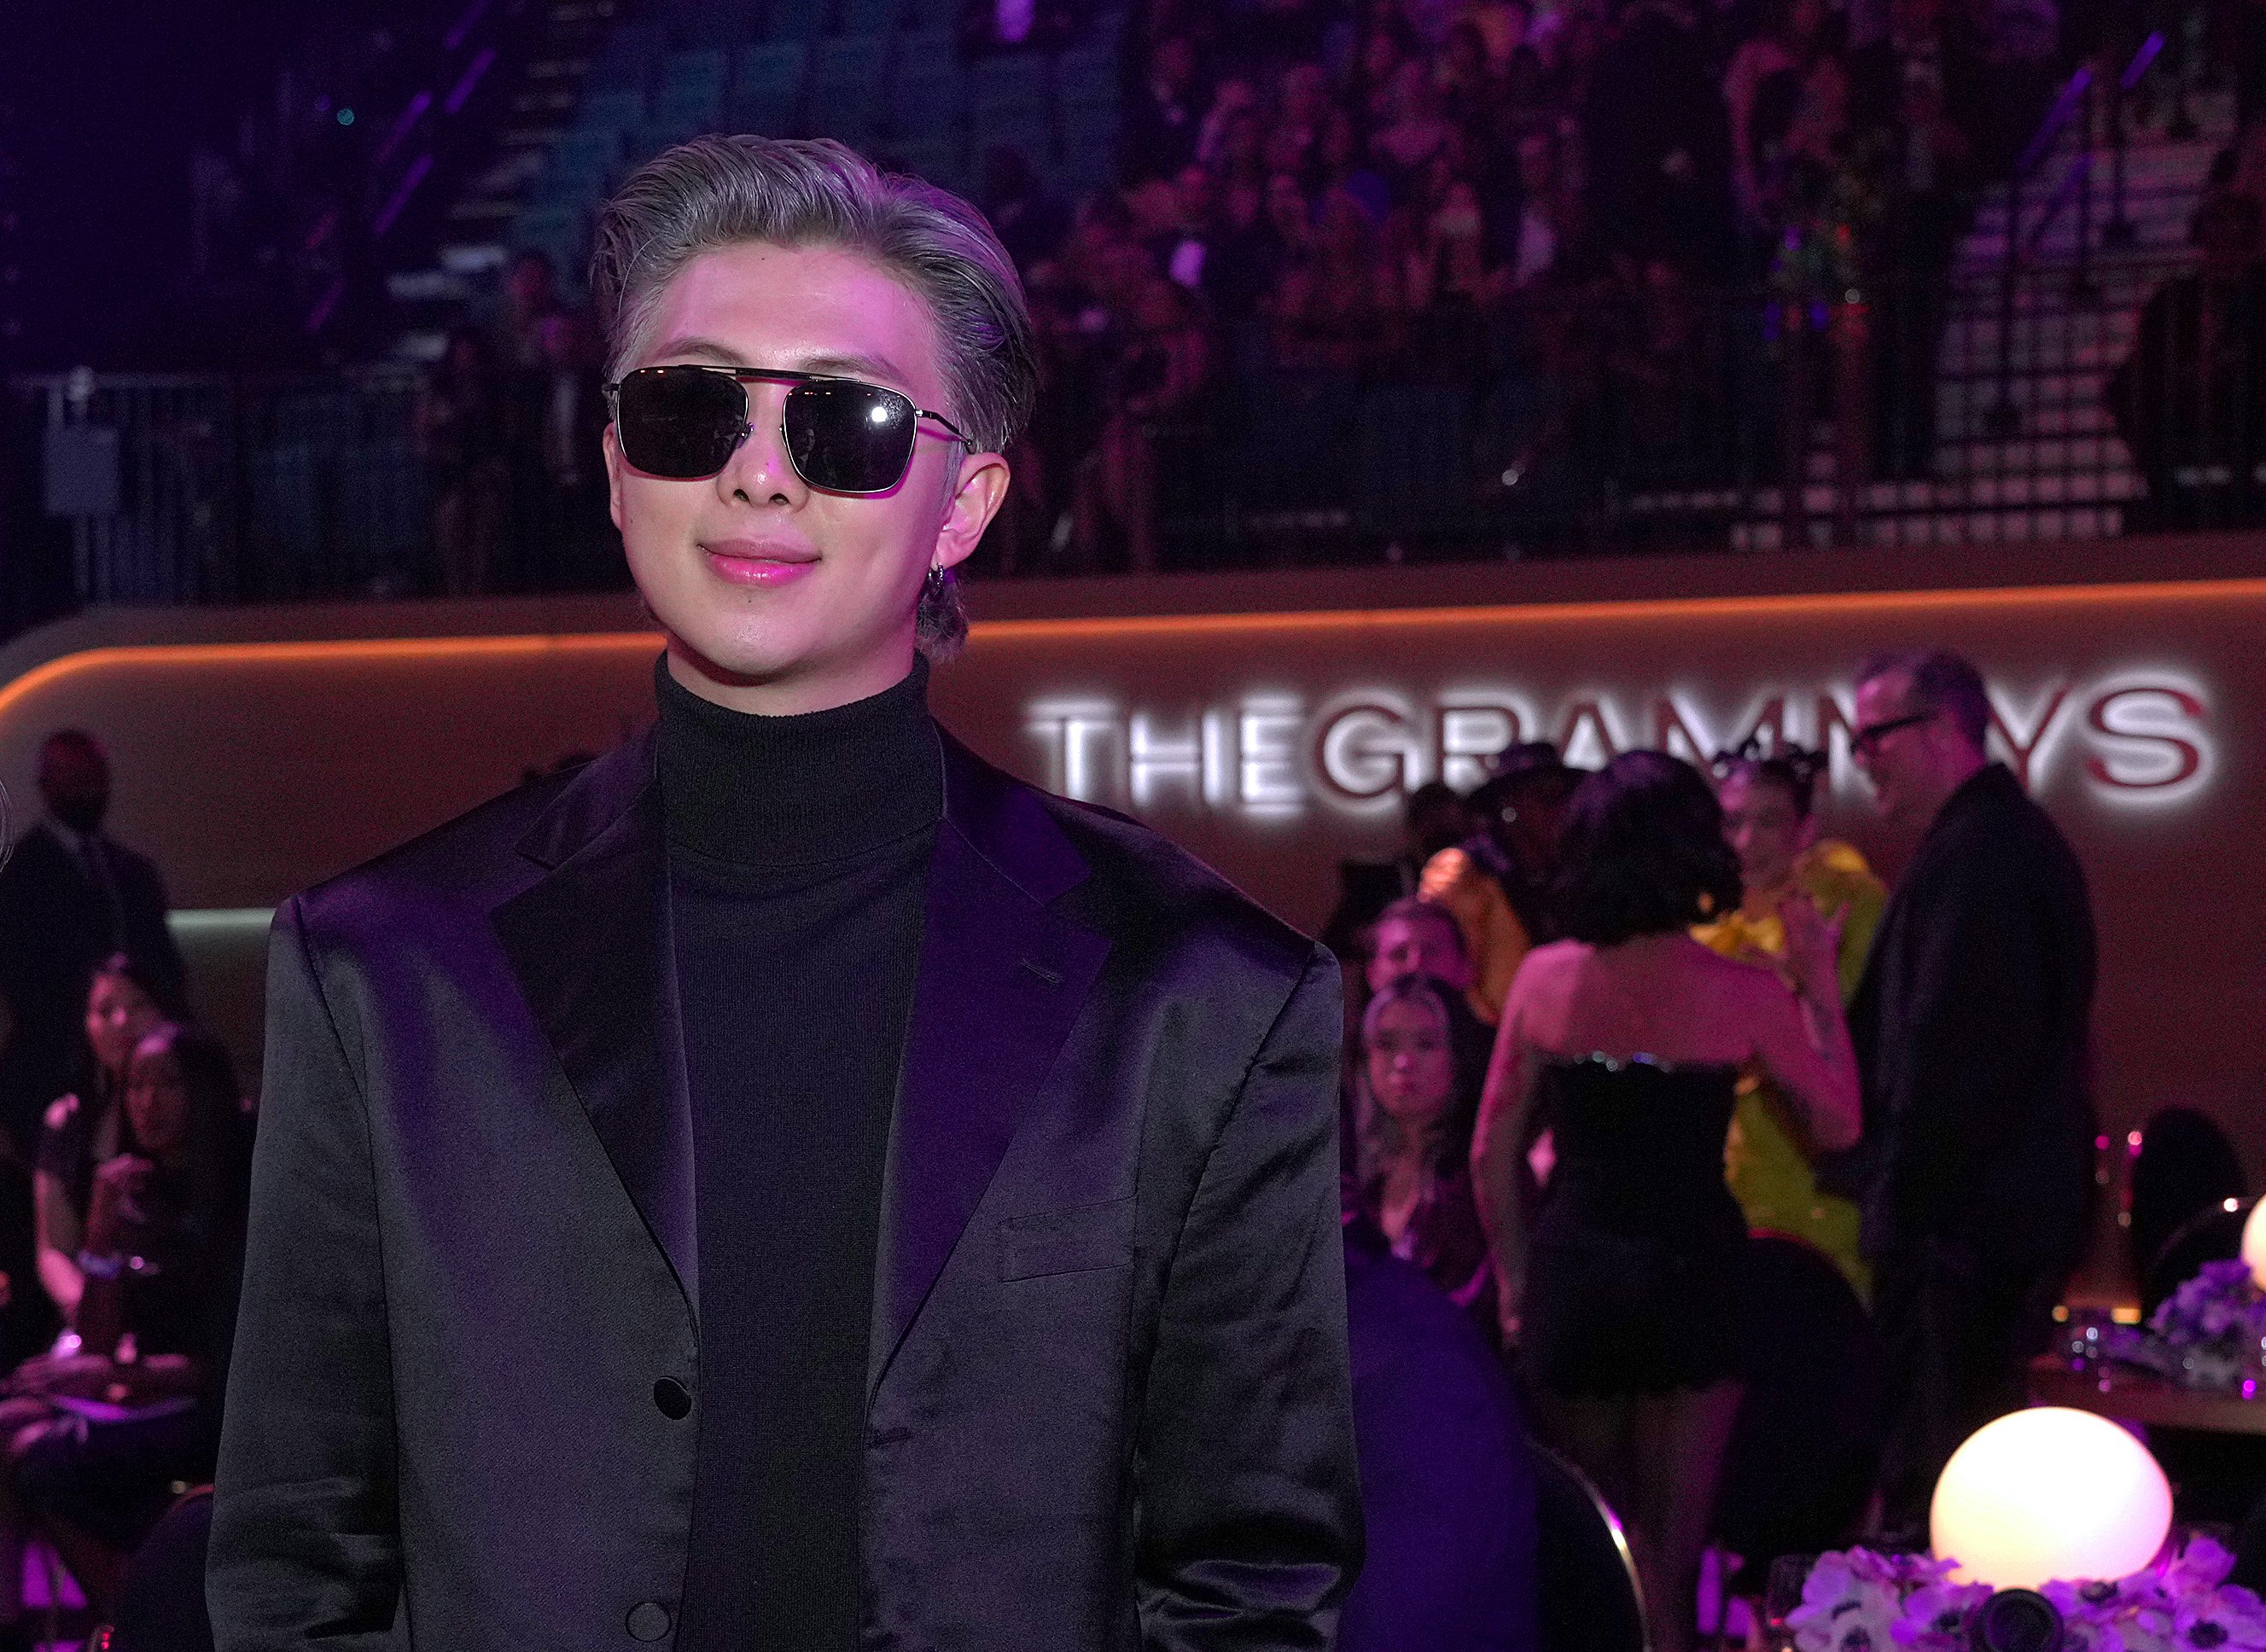 RM of BTS attends the 64th Annual GRAMMY Awards at MGM Grand Garden Arena